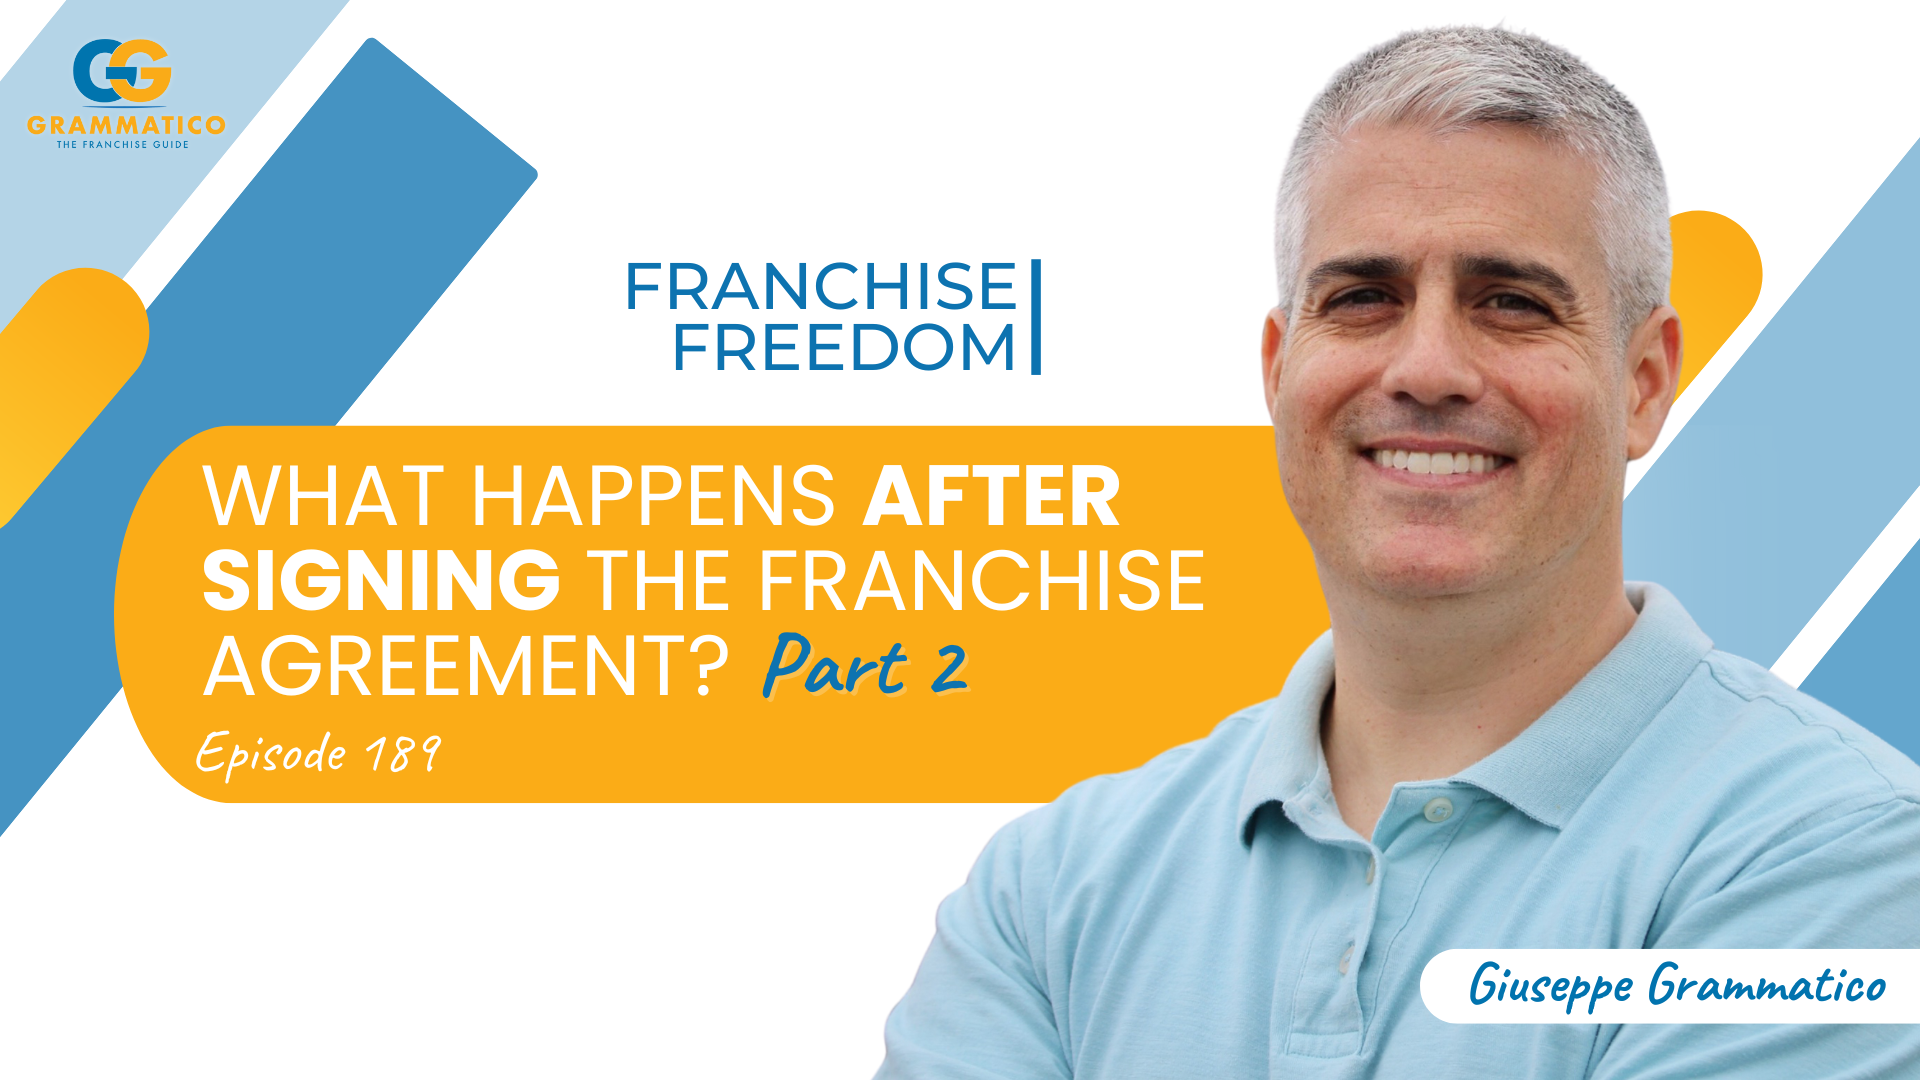 What Happens After Signing The Franchise Agreement? – Part 2 of 2